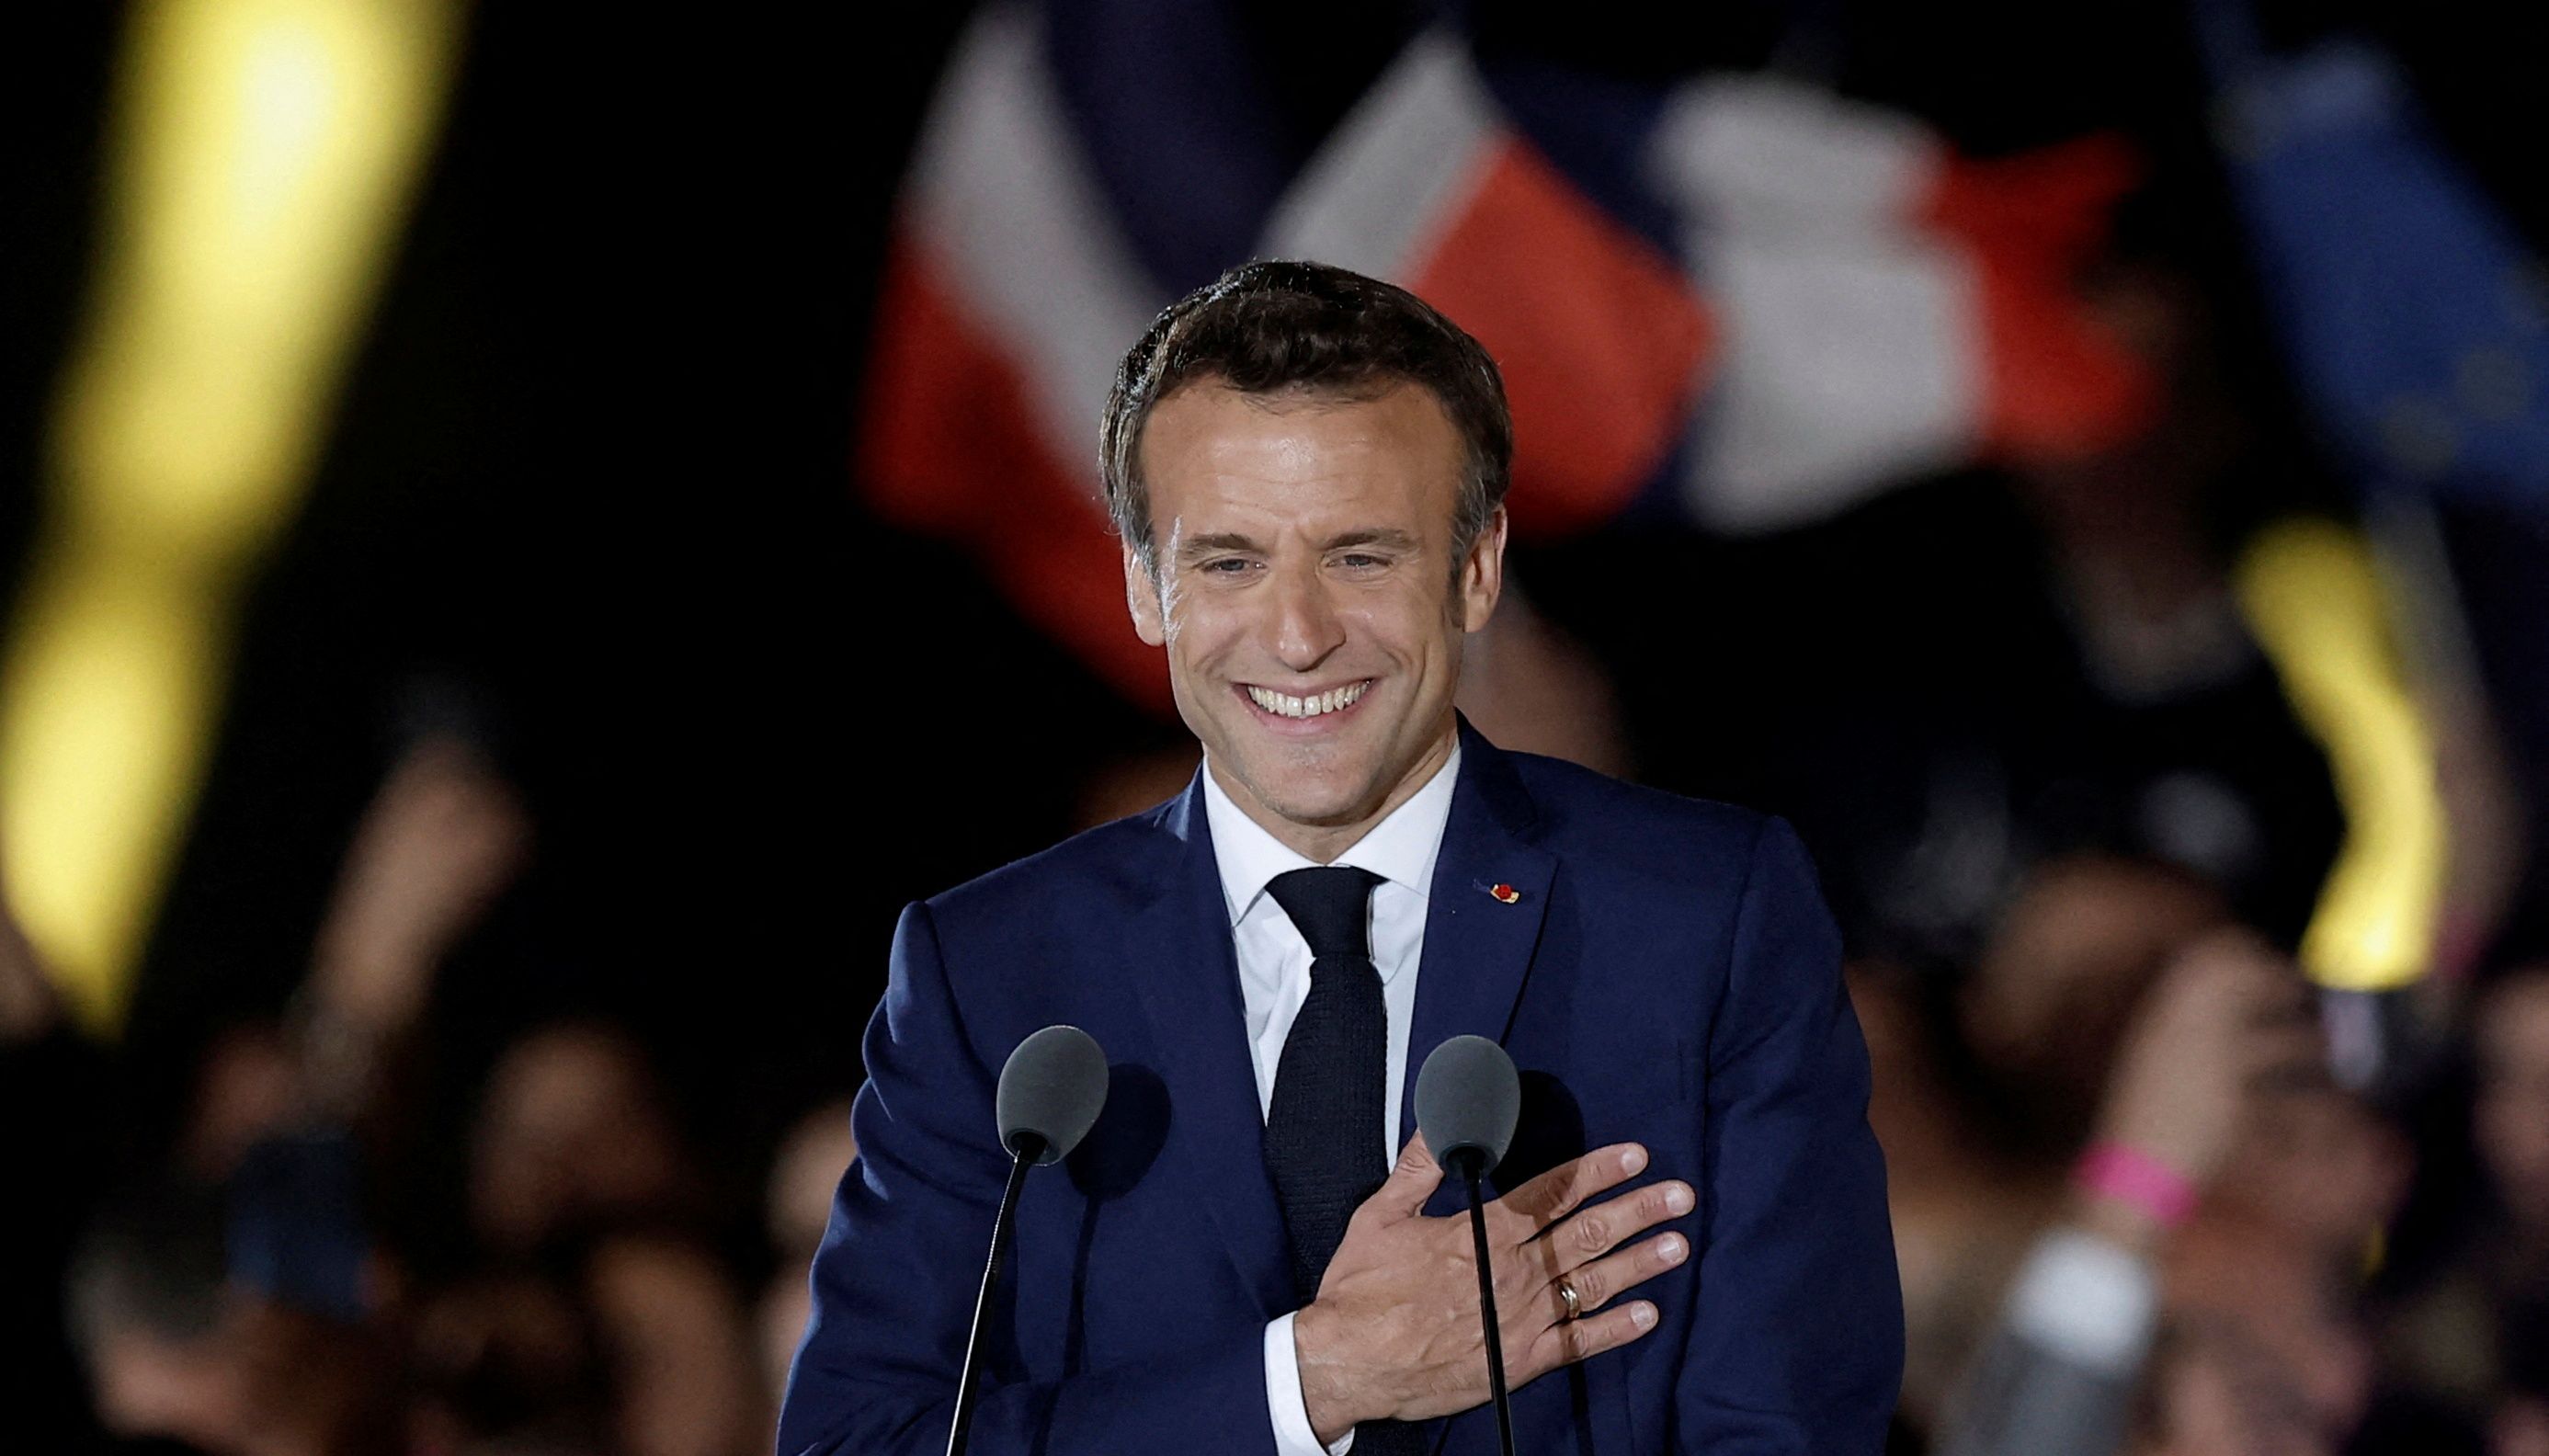 French President Emmanuel Macron gestures as he arrives to deliver a speech after being re-elected as president, following the results in the second round of the 2022 French presidential election